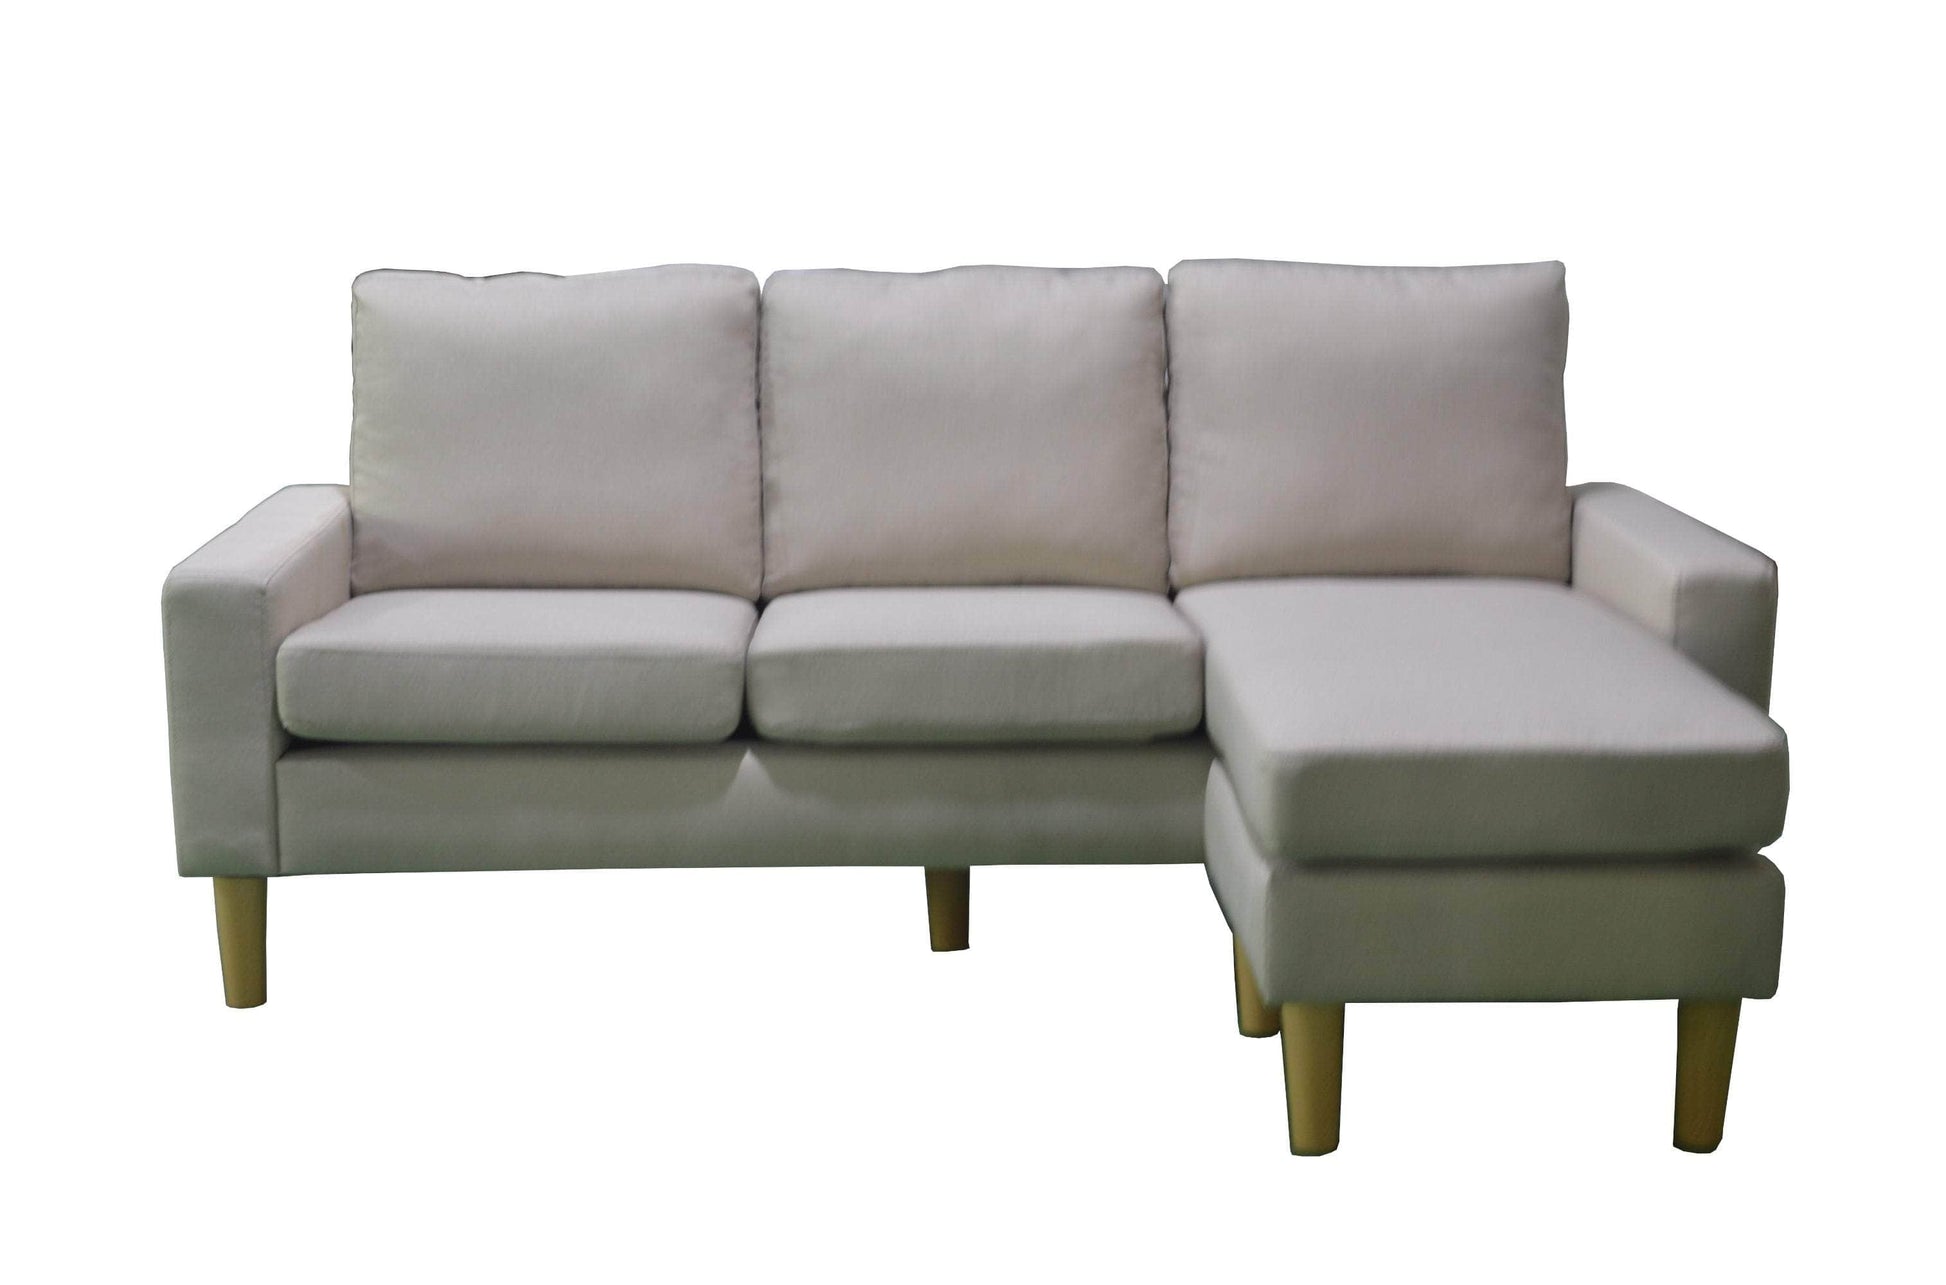 Urban Cali Sectional Cream San Francisco 74.8" Wide Sectional Sofa with Reversible Chaise - Available in 4 Colours